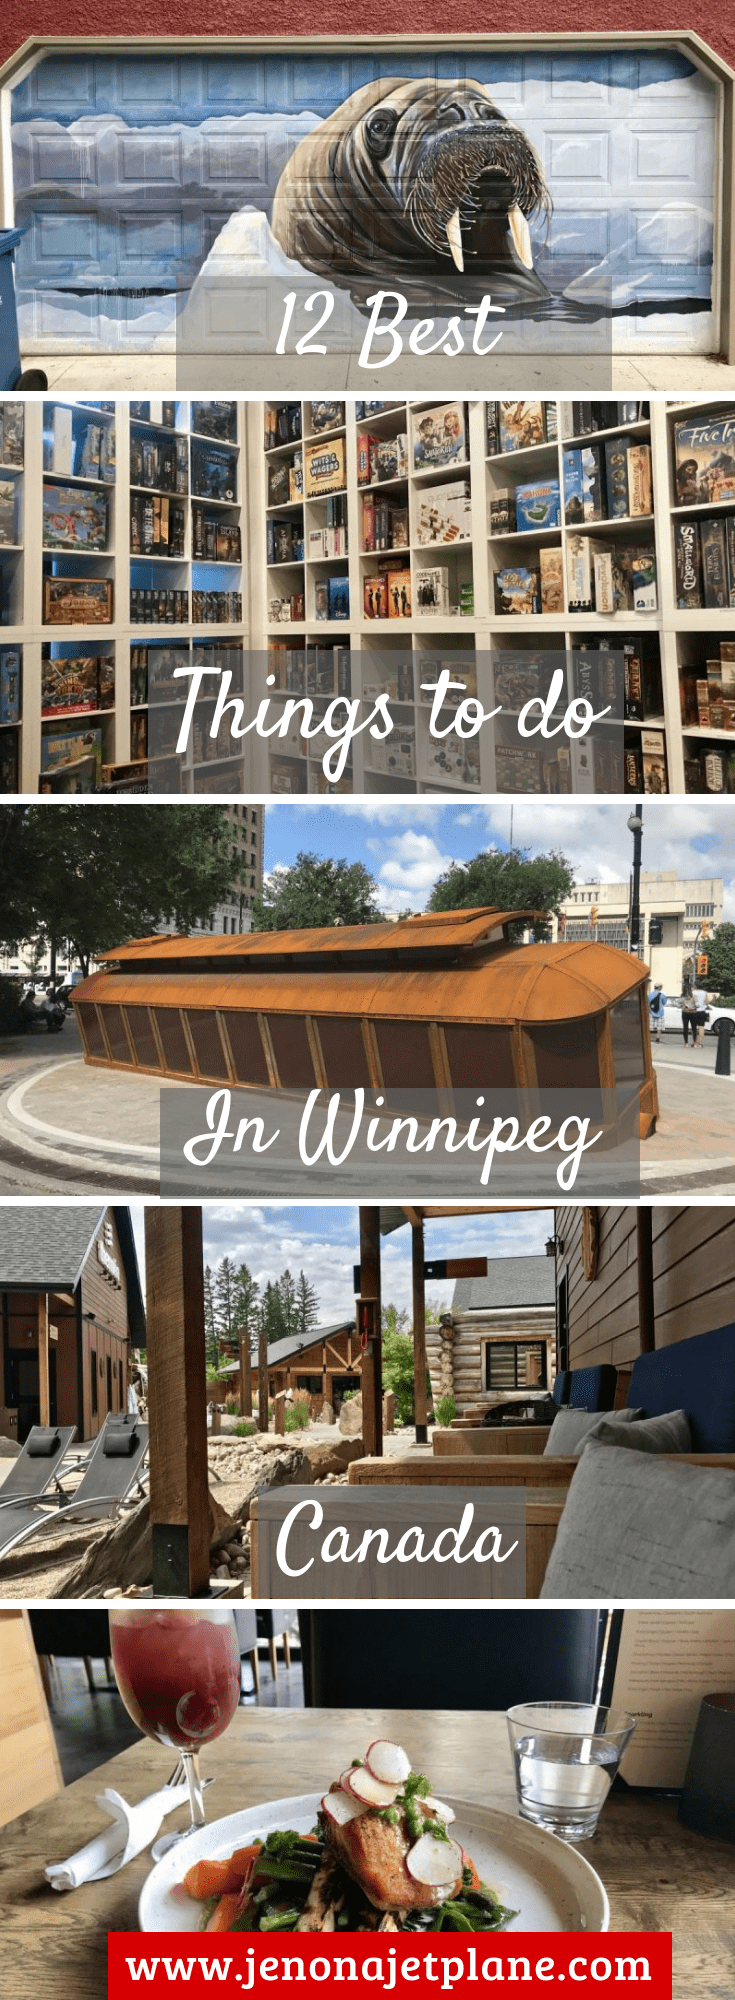 Looking for the best things to do in Winnipeg, Canada? From street art finds to the best restaurants in the city, here are 12 must-see stops for first-time visitors! #winnipegcanada #winnipegcanadathingstodoin #winnipegmanitoba #winnipeg #travelinspiration #canadatravel